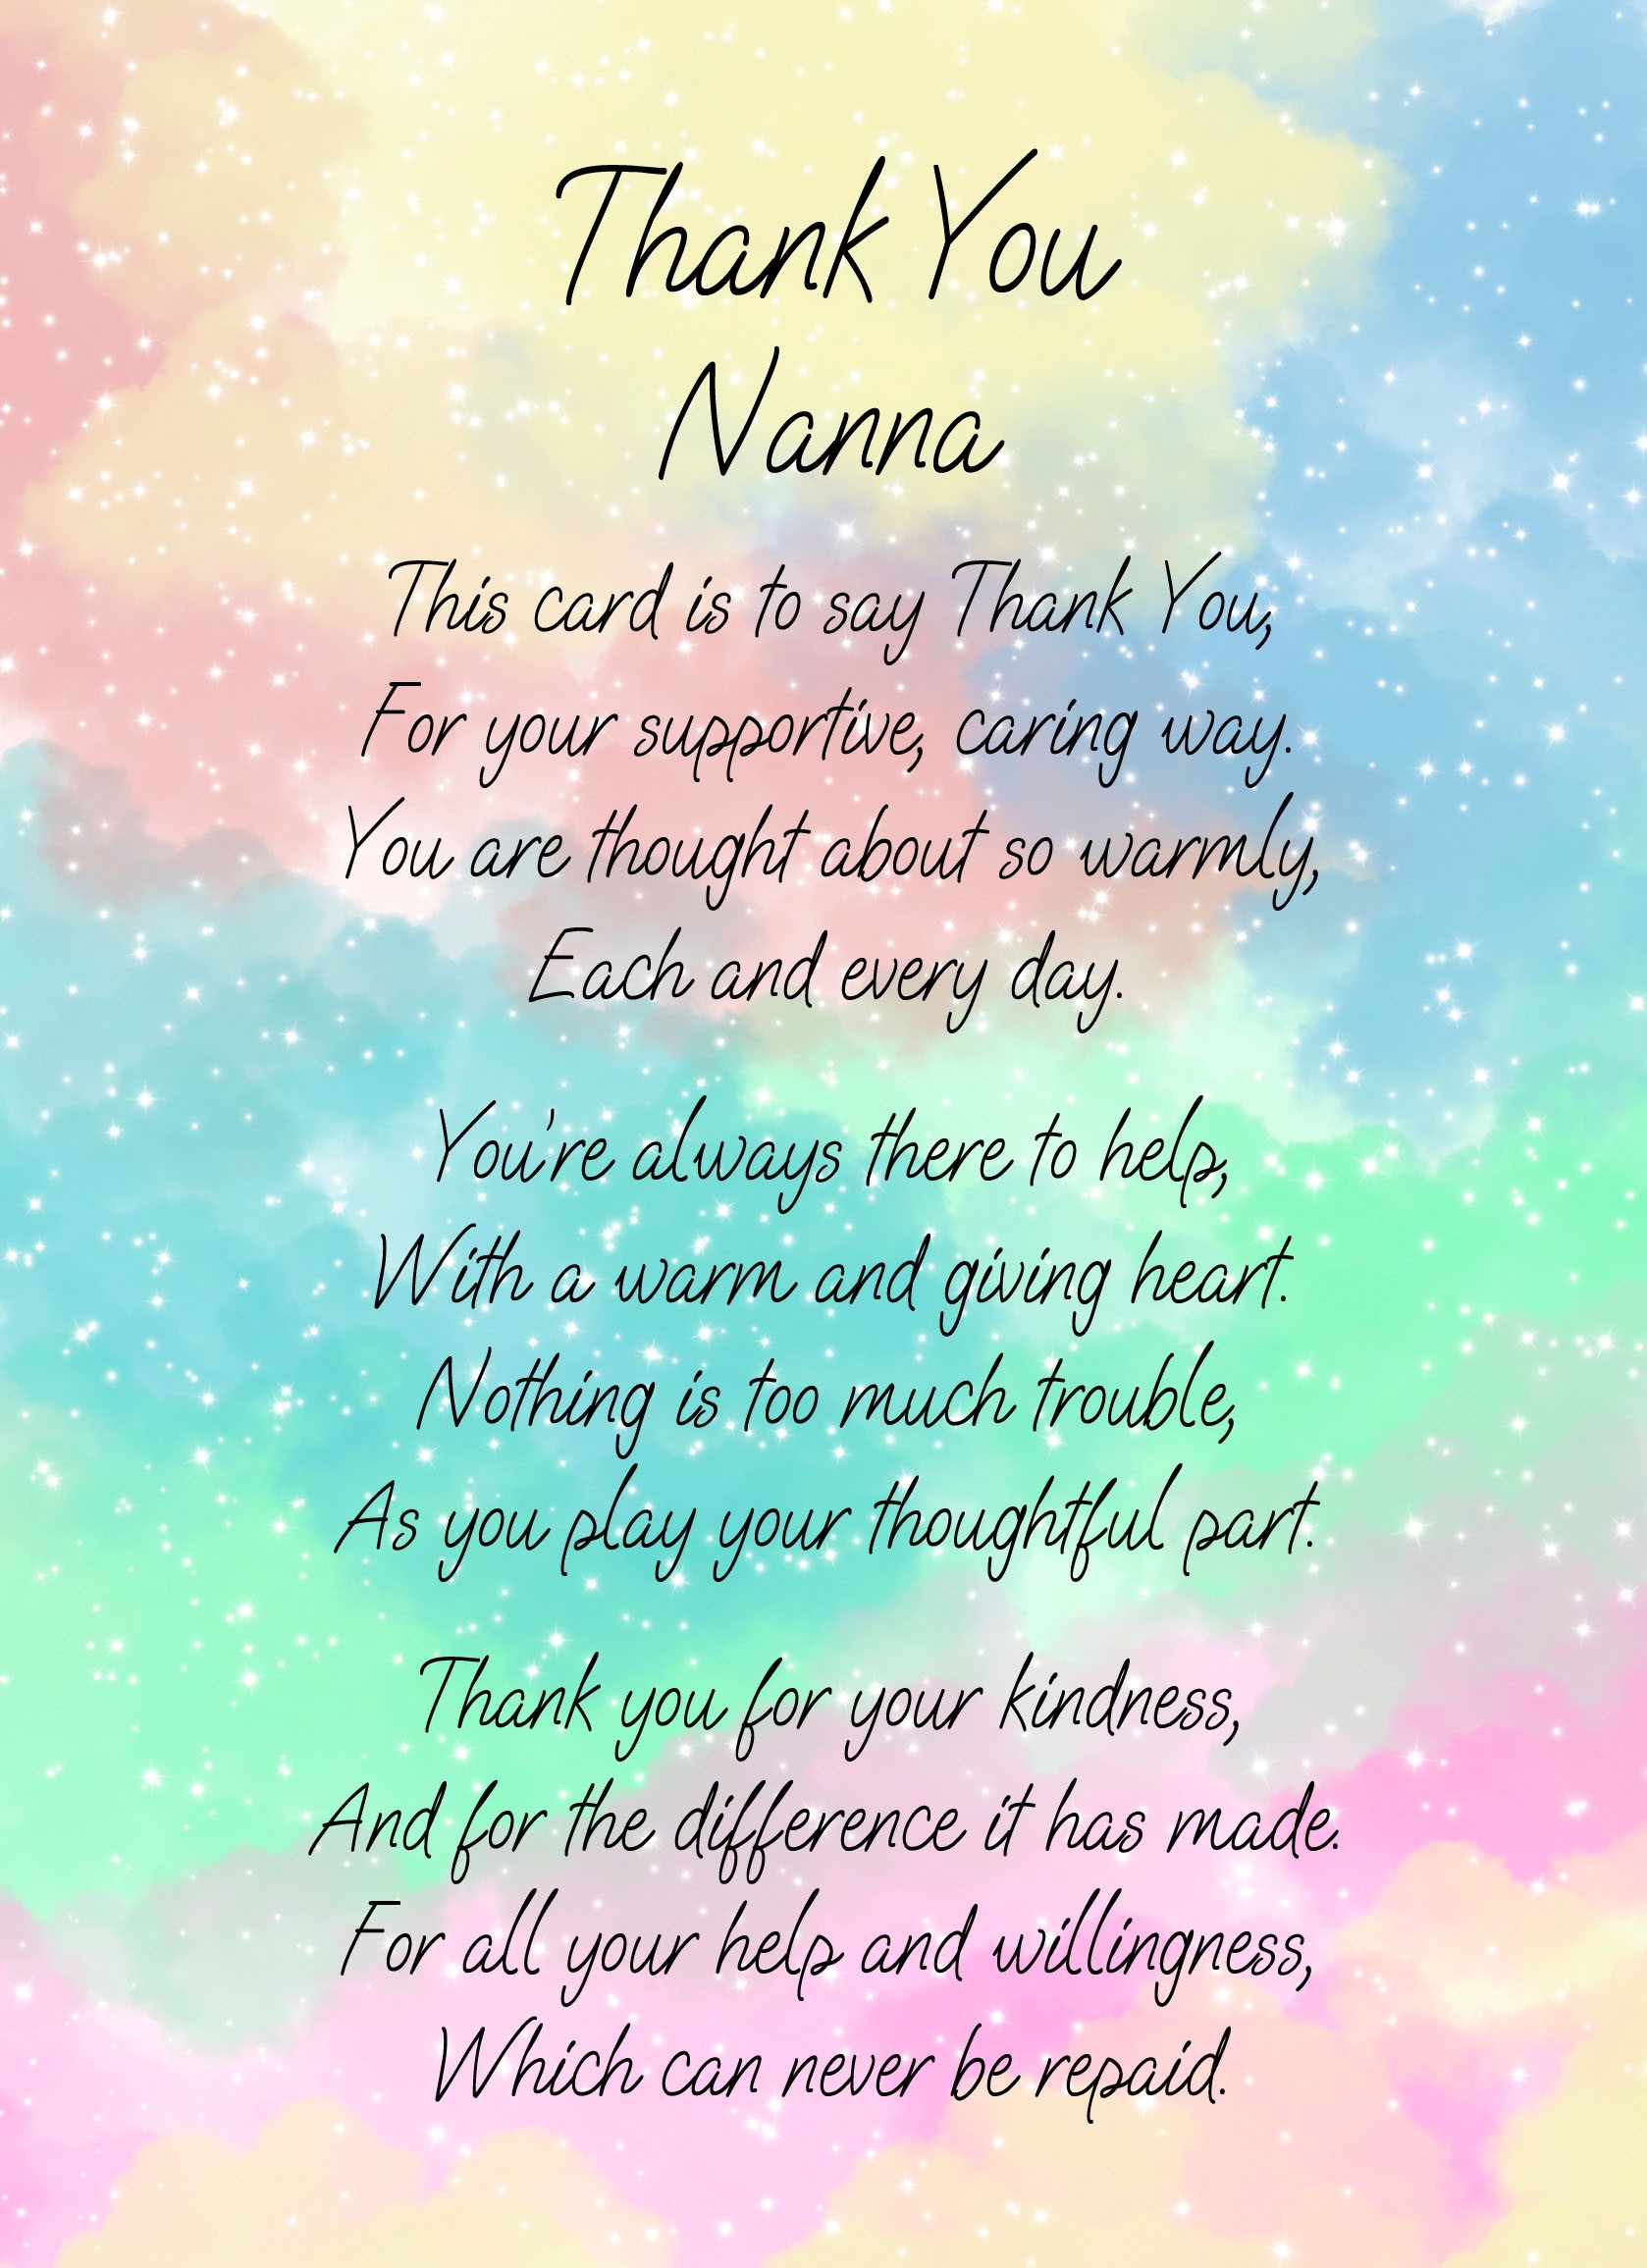 Thank You Poem Verse Card For Nanna